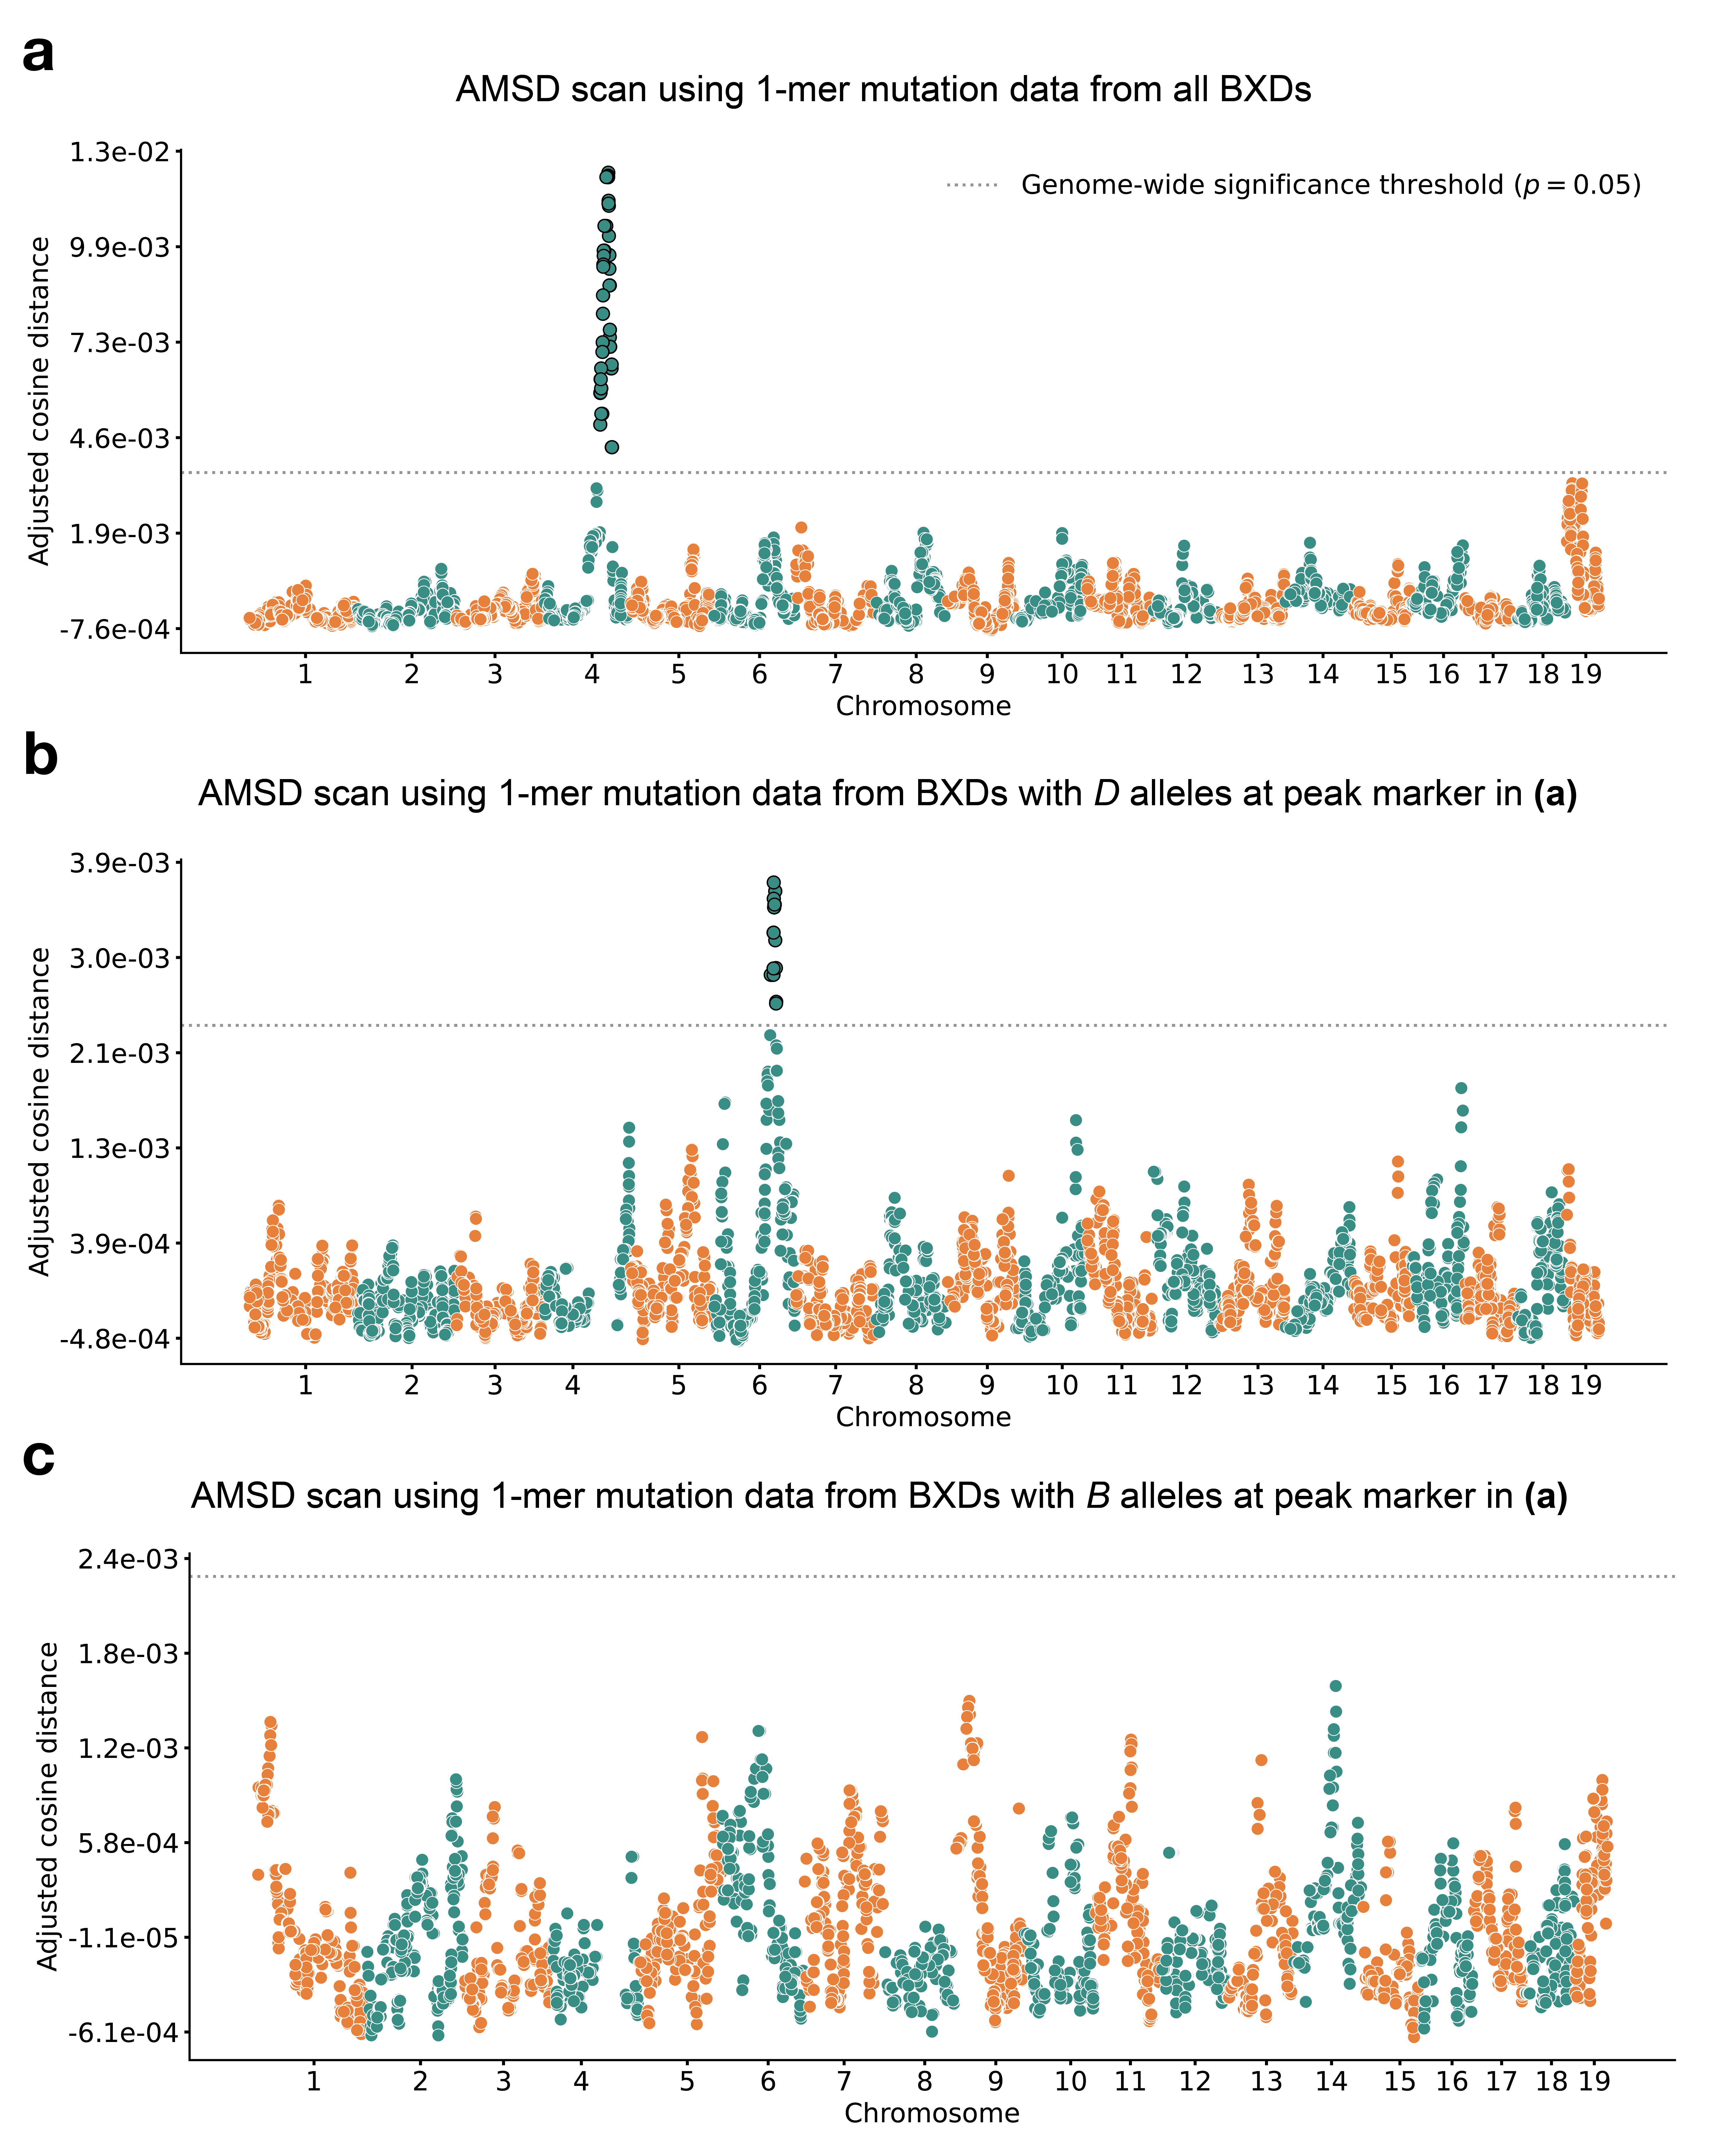 Figure 2: Results of aggregate mutation spectrum distance scans in the BXDs. a) Adjusted cosine distances between aggregate 1-mer de novo mutation spectra on BXD haplotypes (n = 117 haplotypes; 65,552 total mutations) with either D or B alleles at 7,128 informative markers. Cosine distance threshold at p = 0.05 was calculated by performing 10,000 permutations of the BXD mutation data, and is shown as a dotted grey line. b) Adjusted cosine distances between aggregate 1-mer de novo mutation spectra on BXD haplotypes with D alleles at rs27509845 (n = 66 haplotypes; 42,171 total mutations) and either D or B alleles at 7,063 informative markers. Cosine distance threshold at p = 0.05 was calculated by performing 10,000 permutations of the BXD mutation data, and is shown as a dotted grey line. c) Adjusted cosine distances between aggregate 1-mer de novo mutation spectra on BXD haplotypes with B alleles at rs27509845 (n = 44 haplotypes; 22,645 total mutations) and either D or B alleles at 7,063 informative markers. Cosine distance threshold at p = 0.05 was calculated by performing 10,000 permutations of the BXD mutation data, and is shown as a dotted grey line.